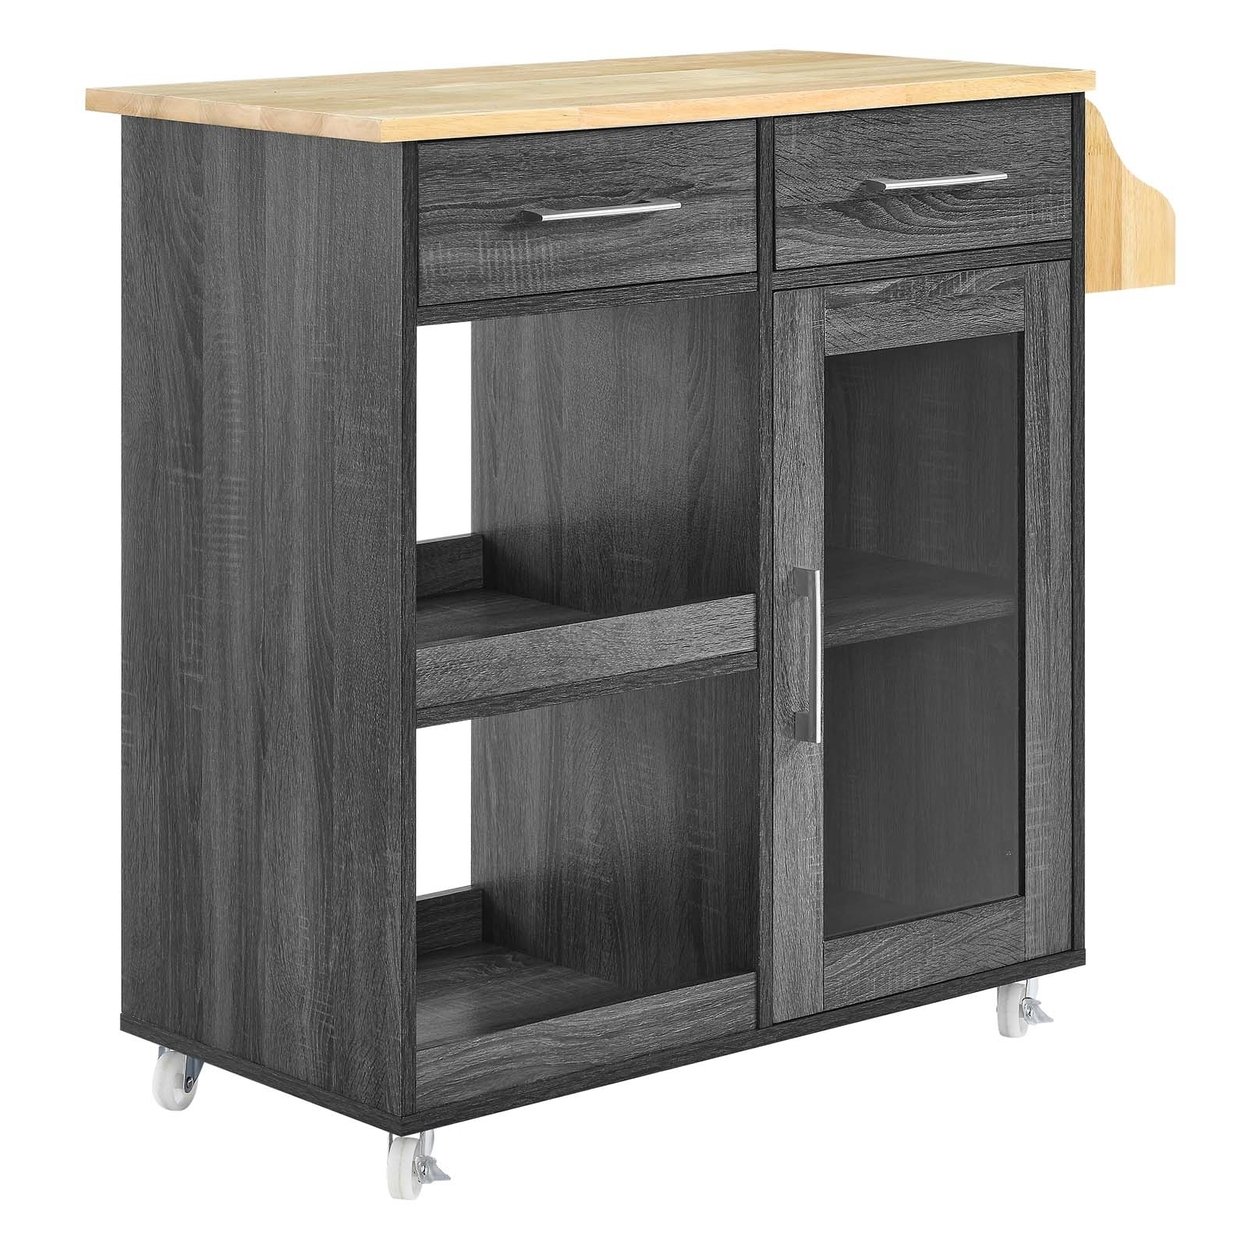 Culinary Kitchen Cart With Spice Rack, Charcoal Natural